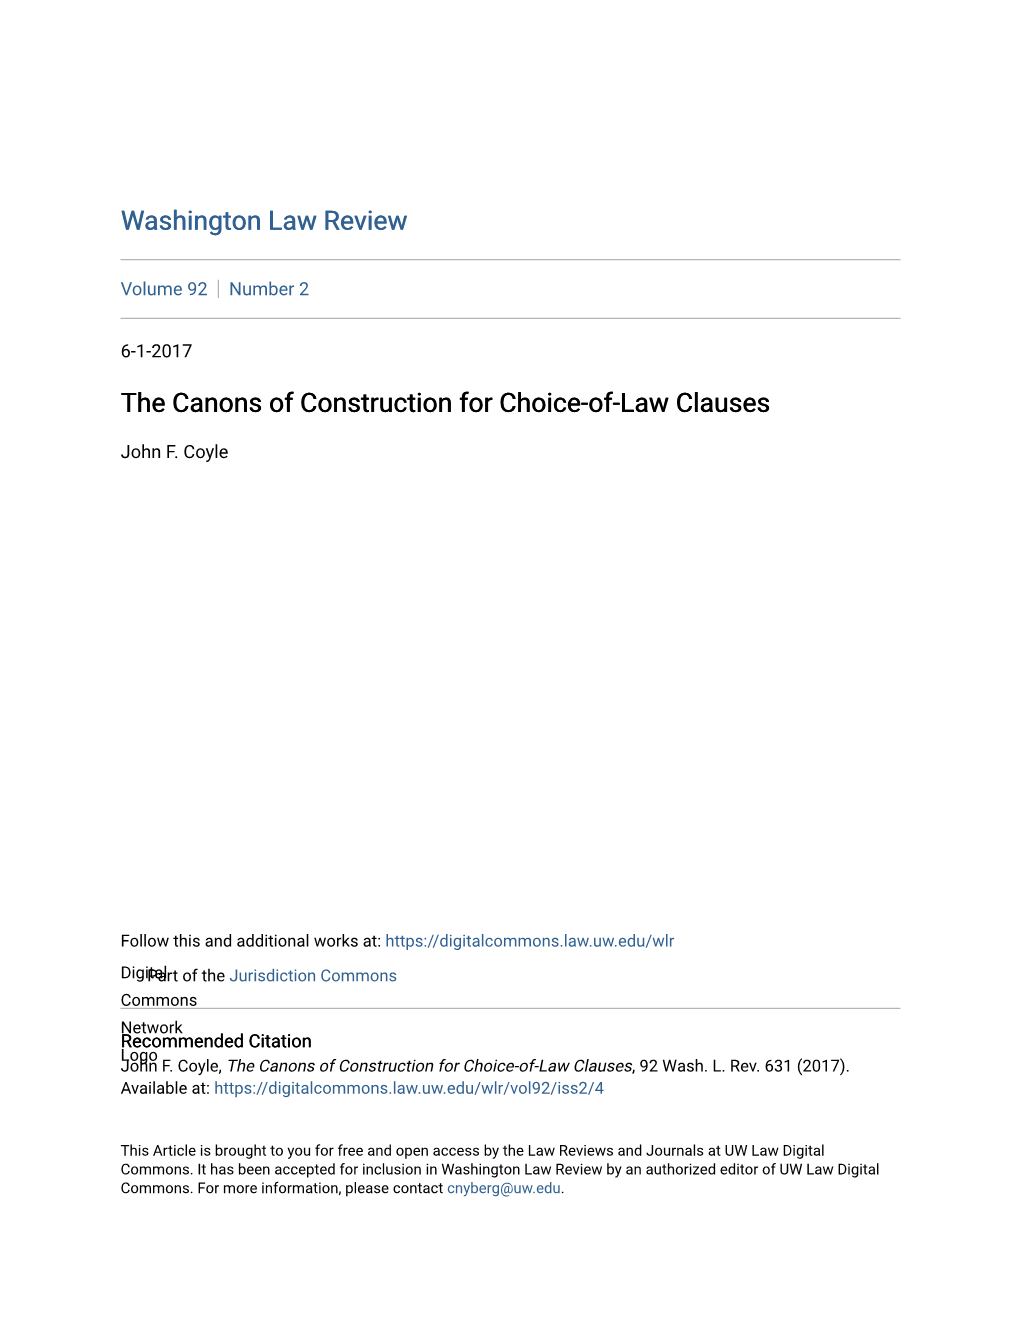 The Canons of Construction for Choice-Of-Law Clauses